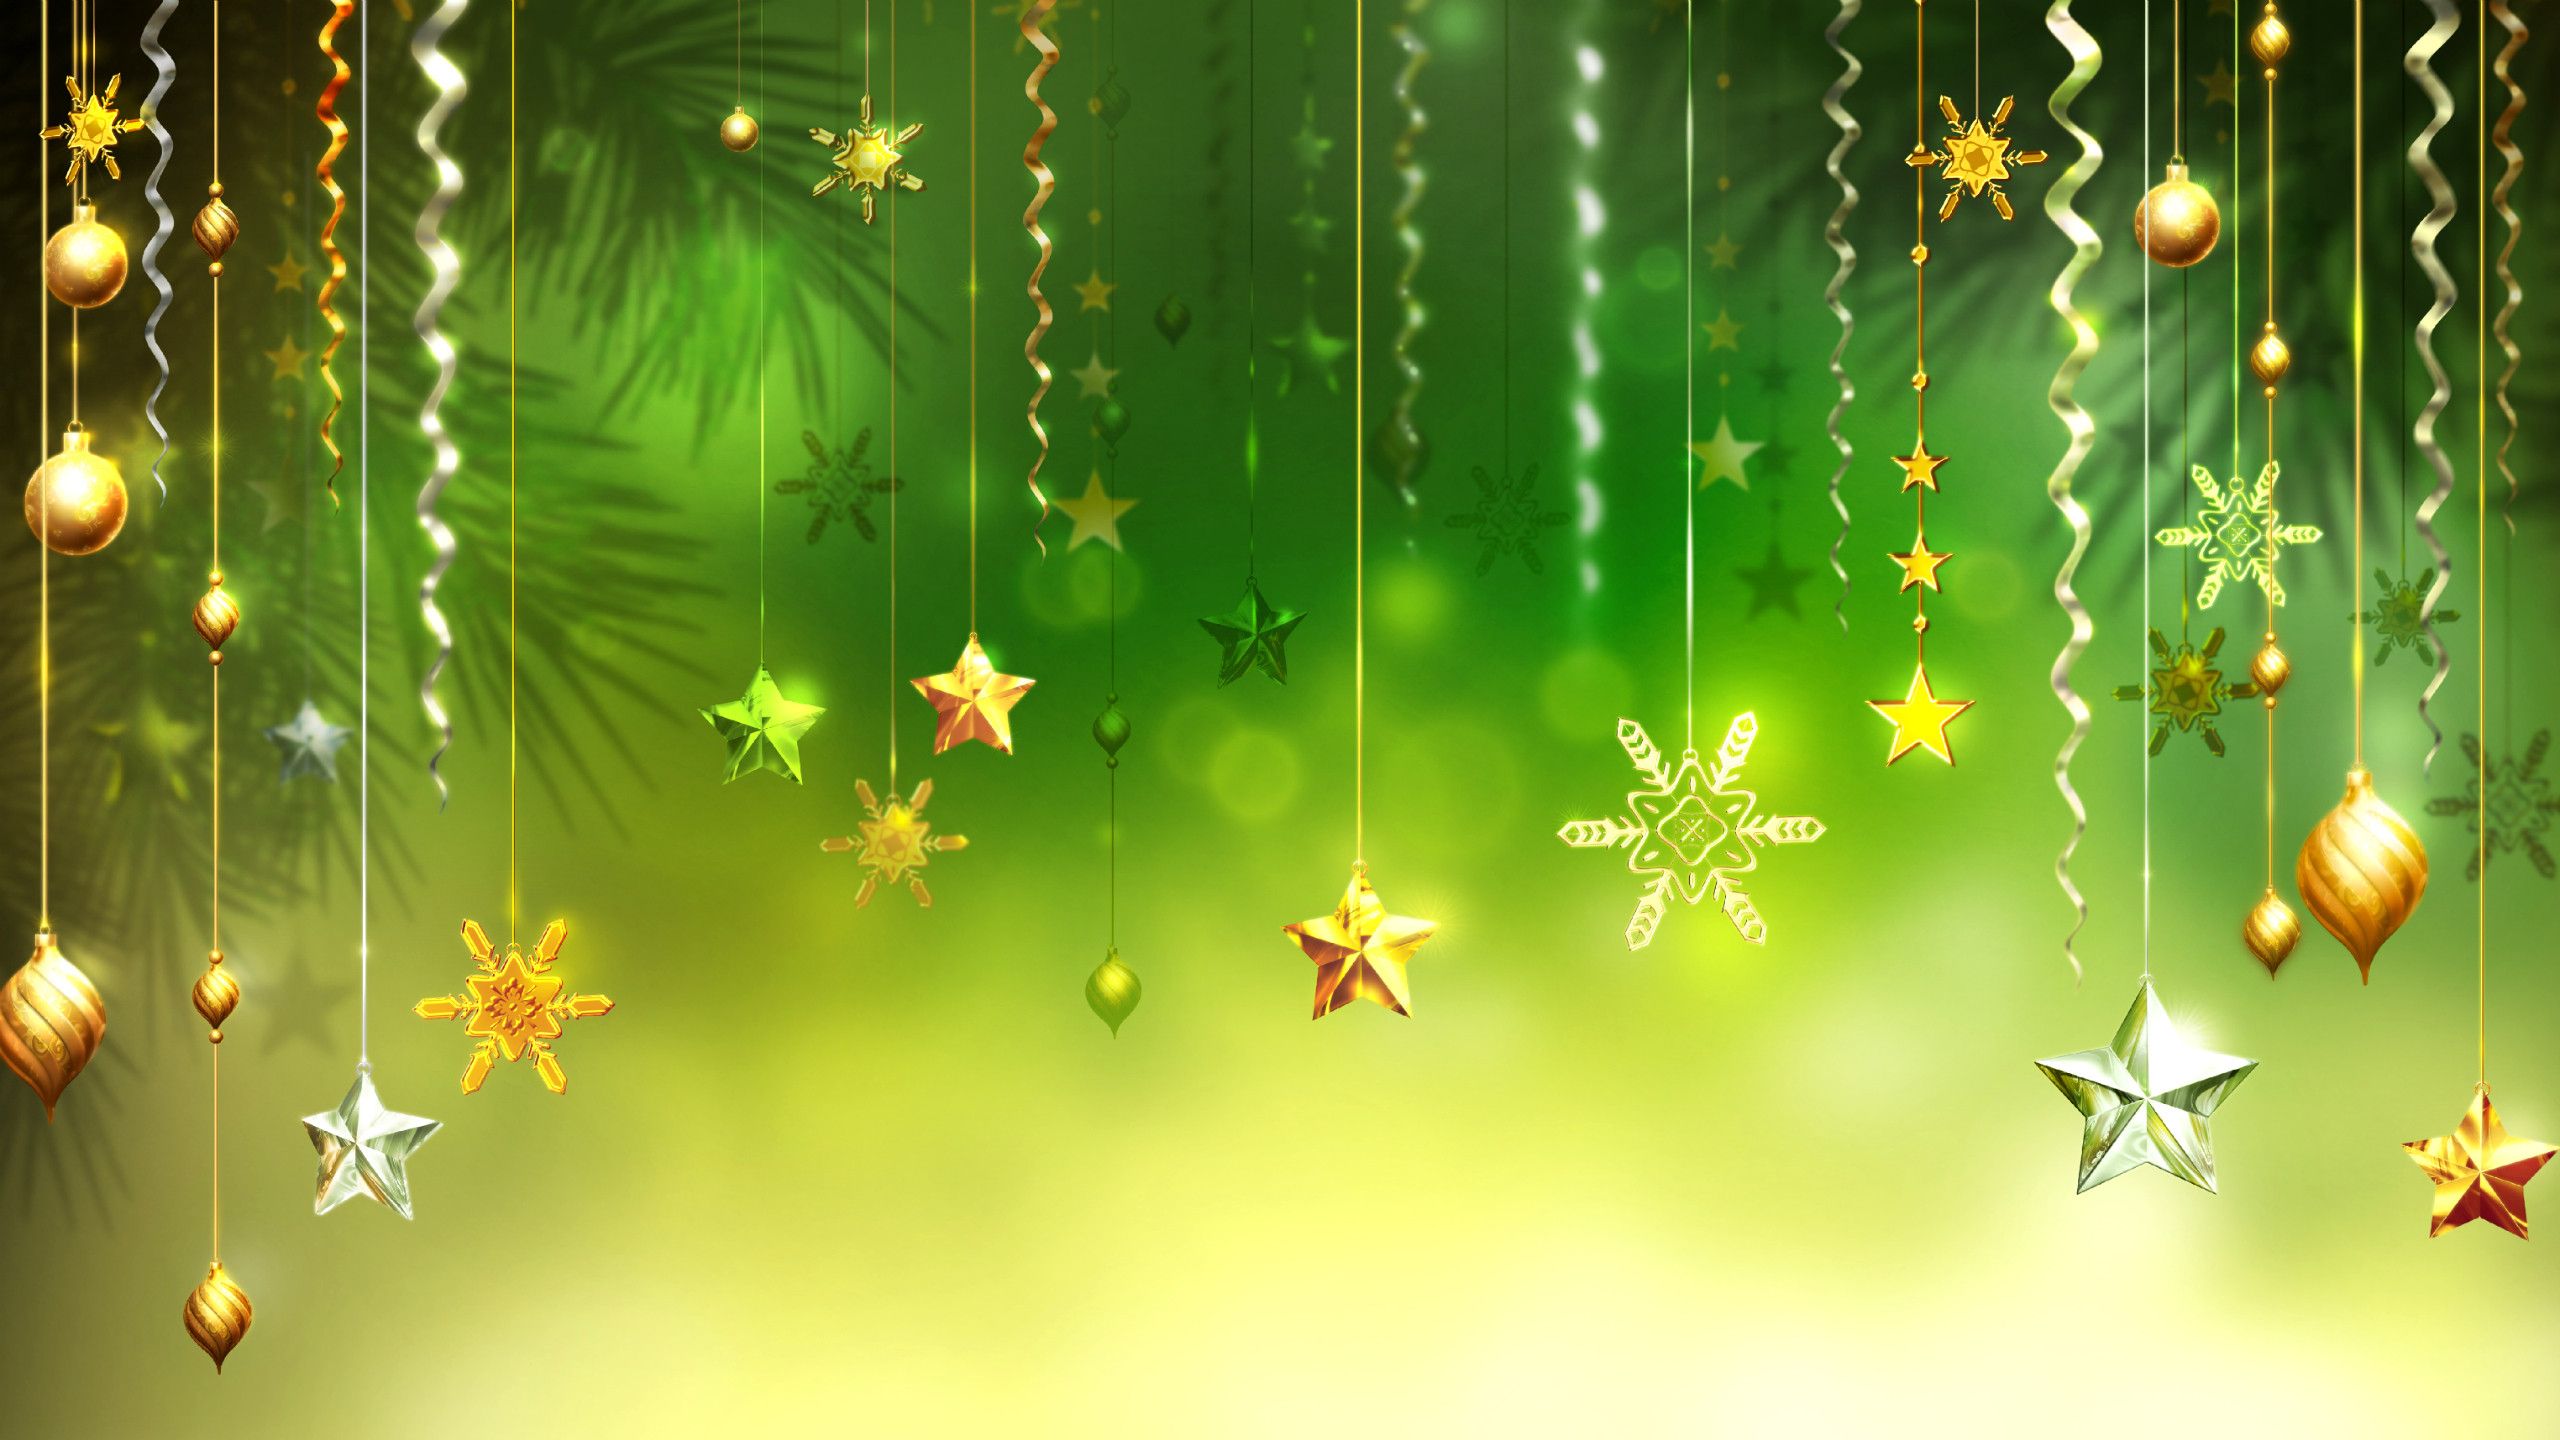 2015 christmas background - wallpapers, images, photos, pictures ...